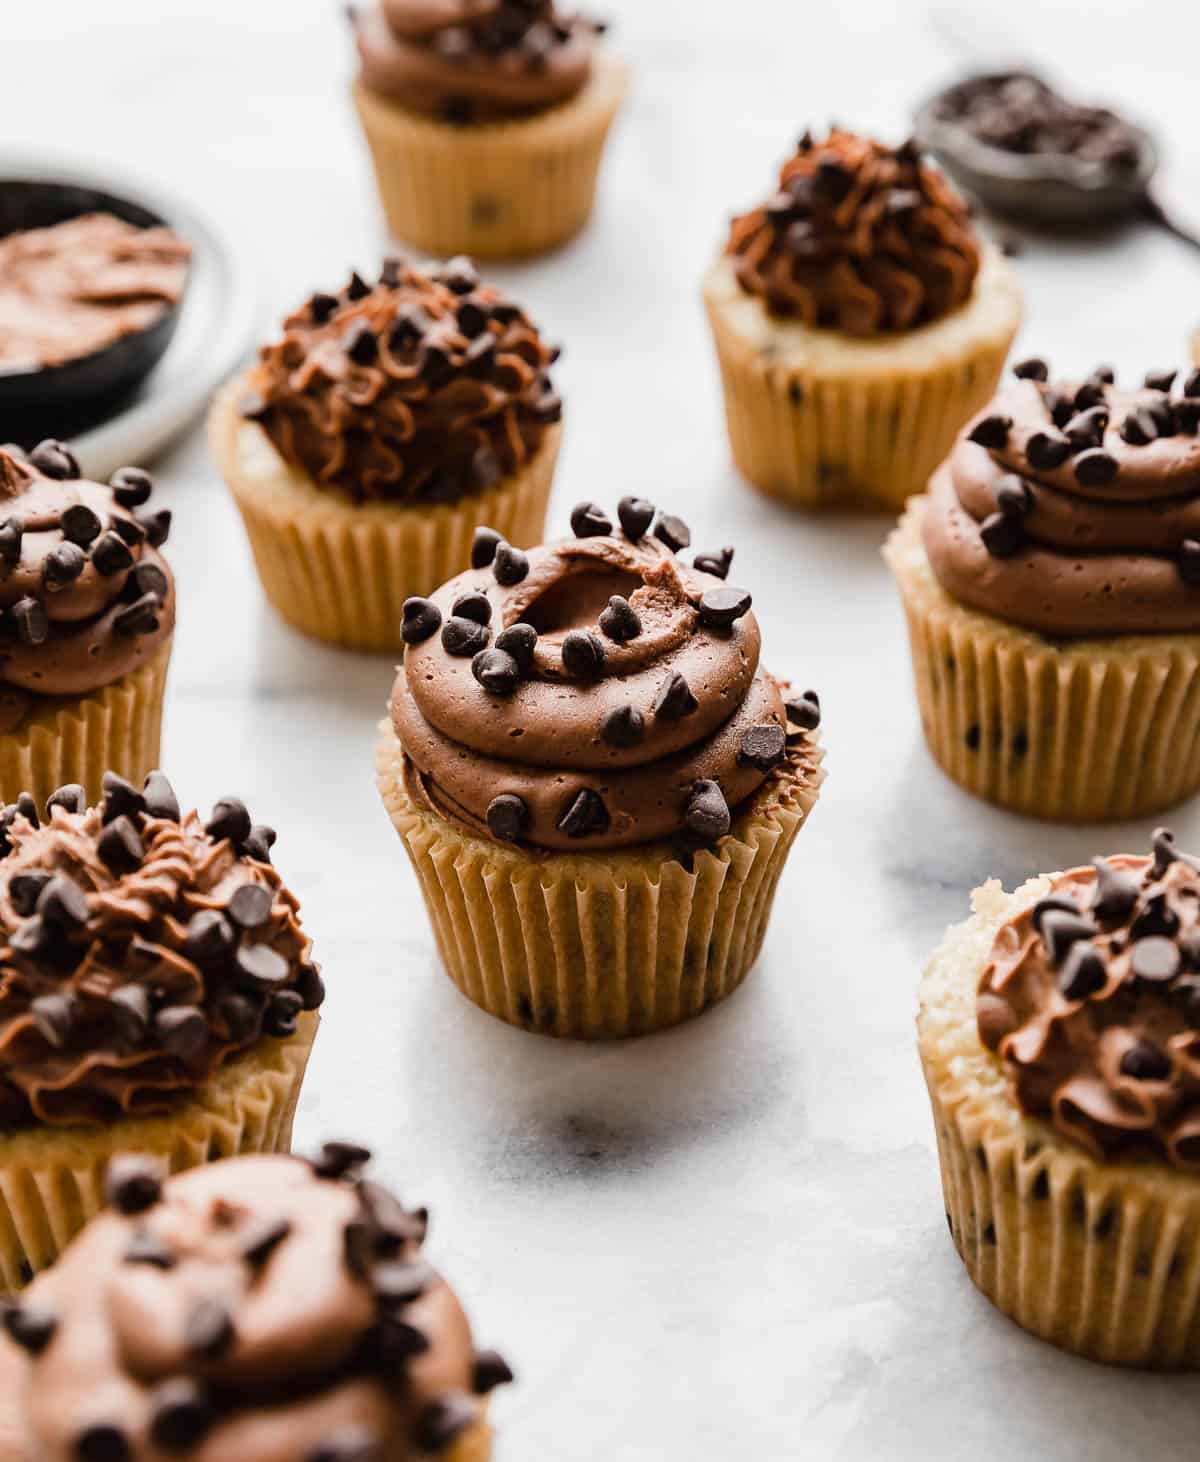 Chocolate Chip Cupcakes topped with a swirl of chocolate frosting and mini chocolate chips on a white background.